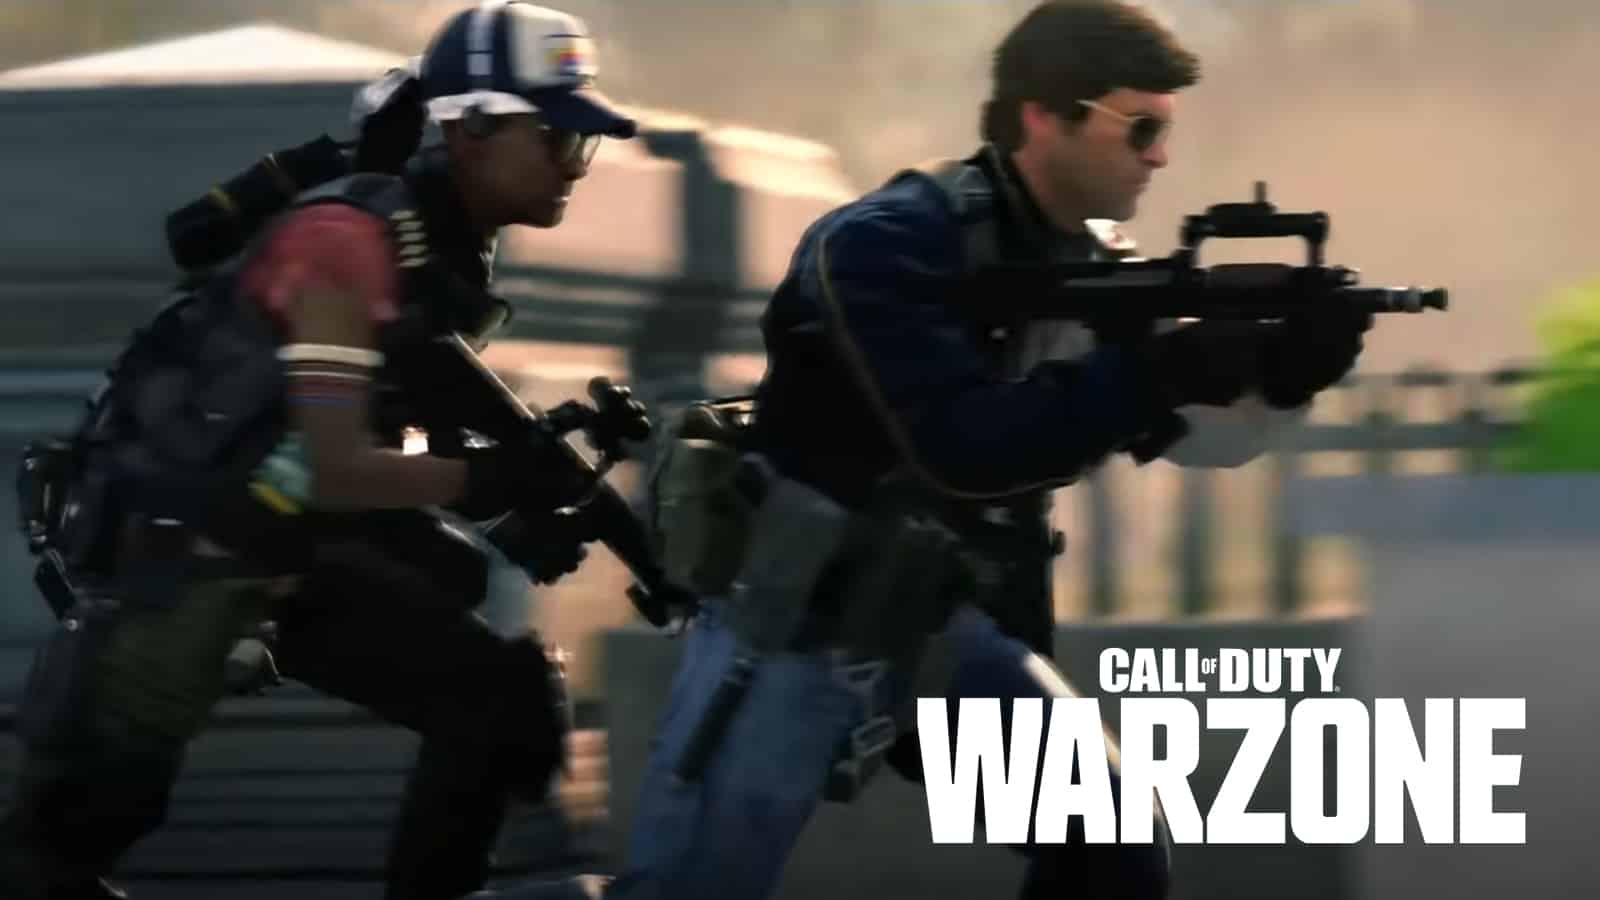 Two players running in Warzone with their weapons drawn